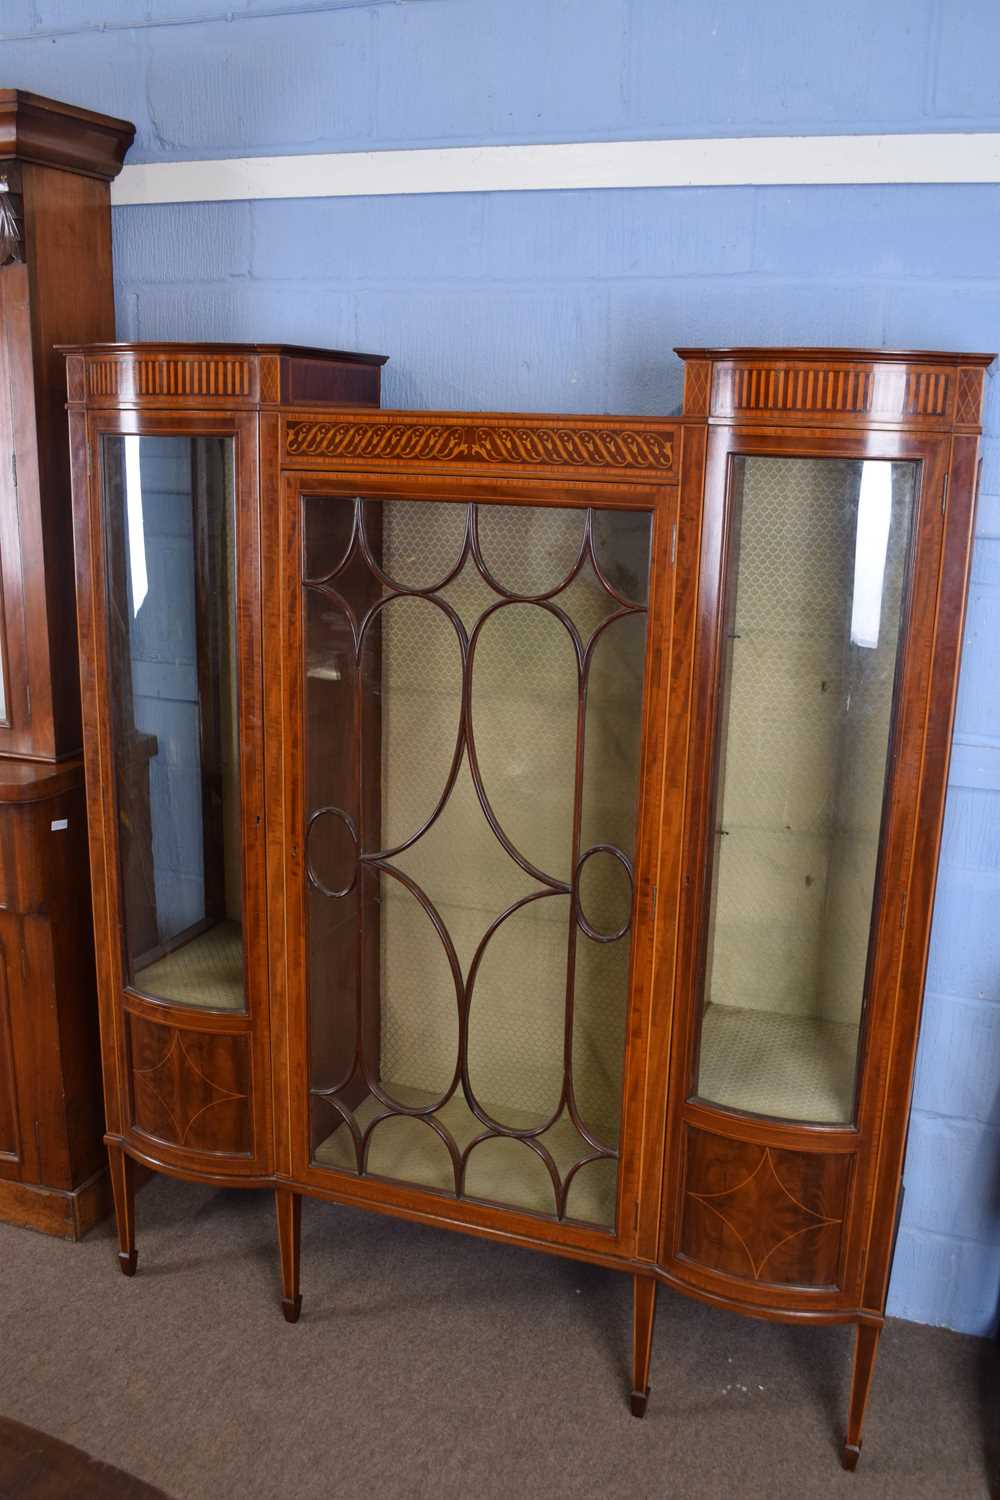 Good quality Edwardian mahogany display cabinet with bowed doors and a central door with strung - Image 2 of 4